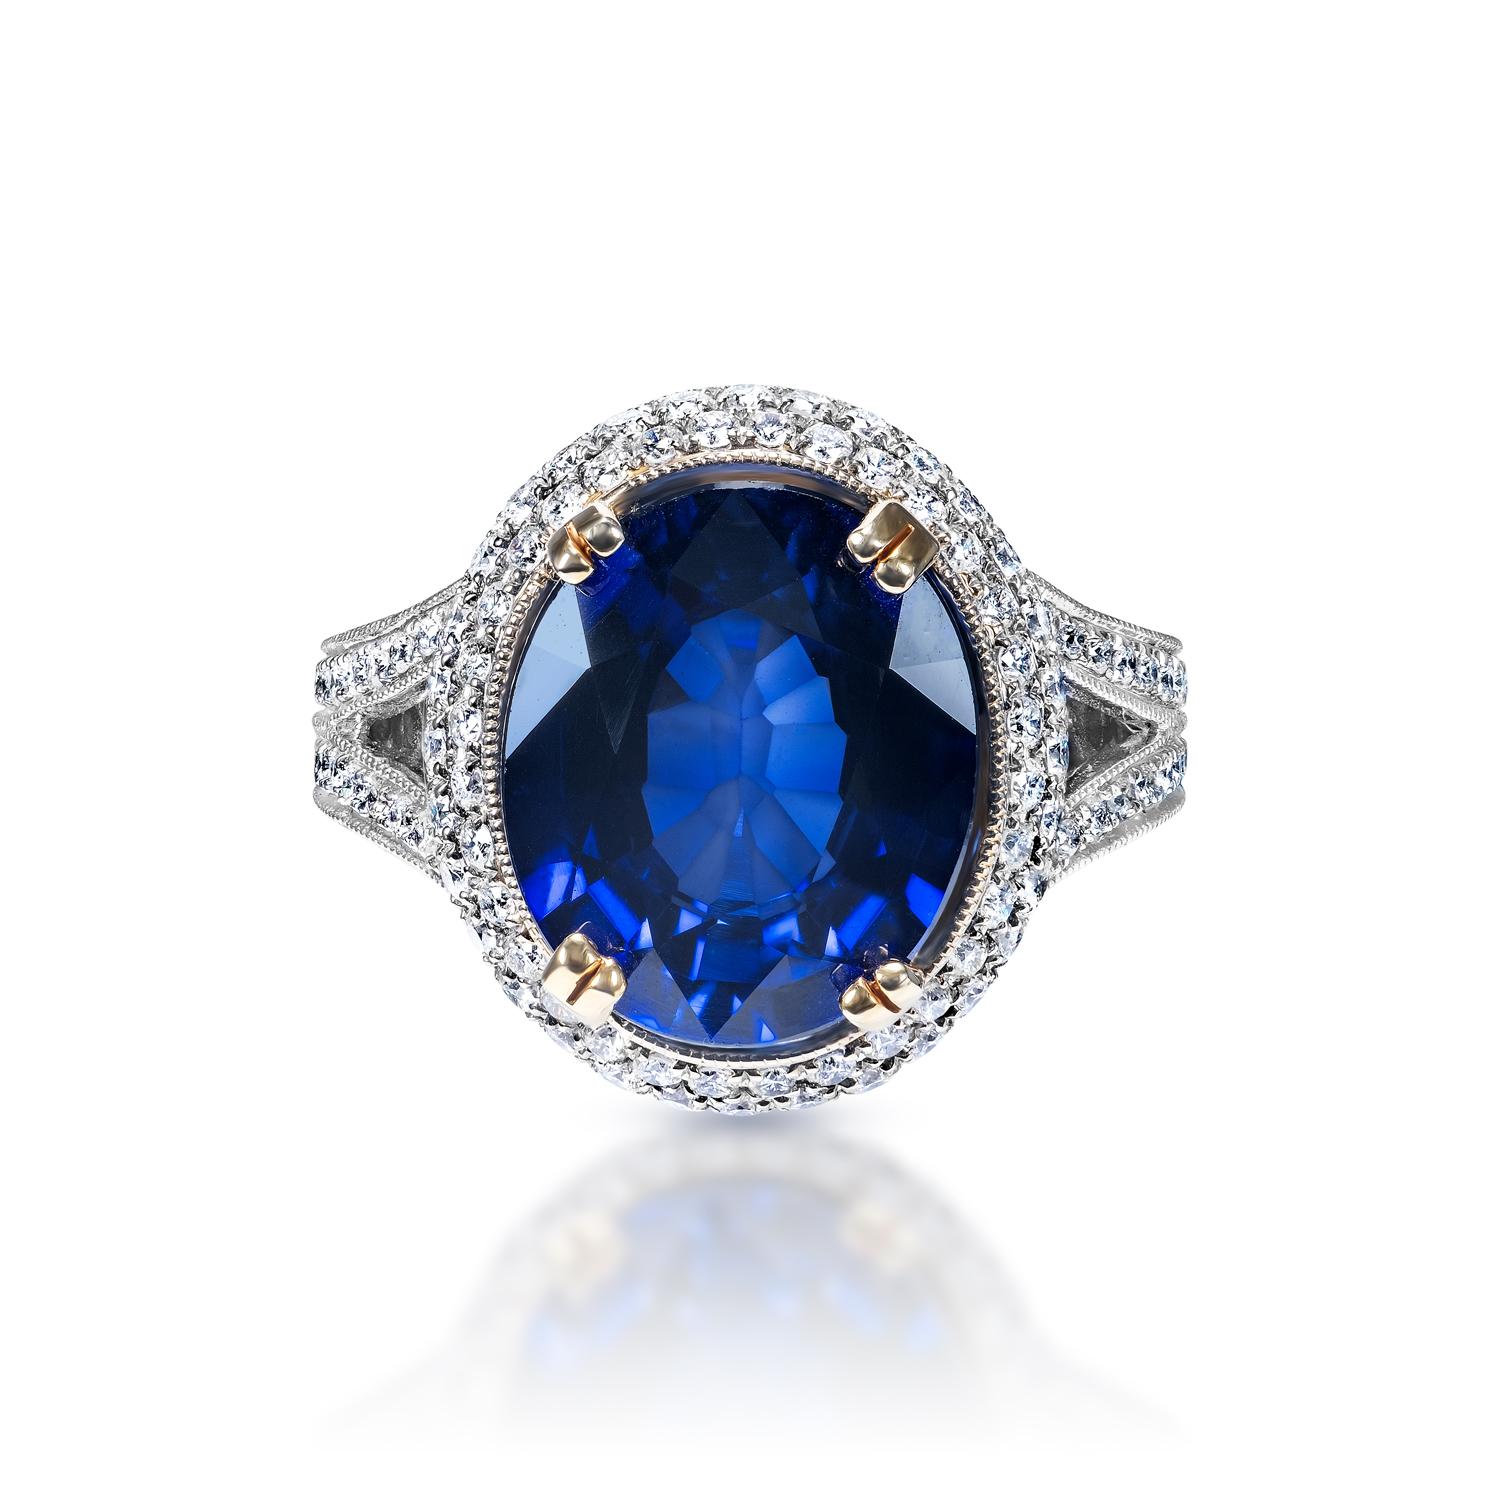 Center Stone Sapphire Ring:
Carat Weight: 7.70 Carats
Color: Blue Sapphire - Diffused J’adore Sapphire
Style: Oval Cut

Carat Weight: 1.90 Carats
Shape: Round Brilliant Cut
Settings: Halo & 4 Double Prong
Metal: 18 Karat White Gold


Total Carat